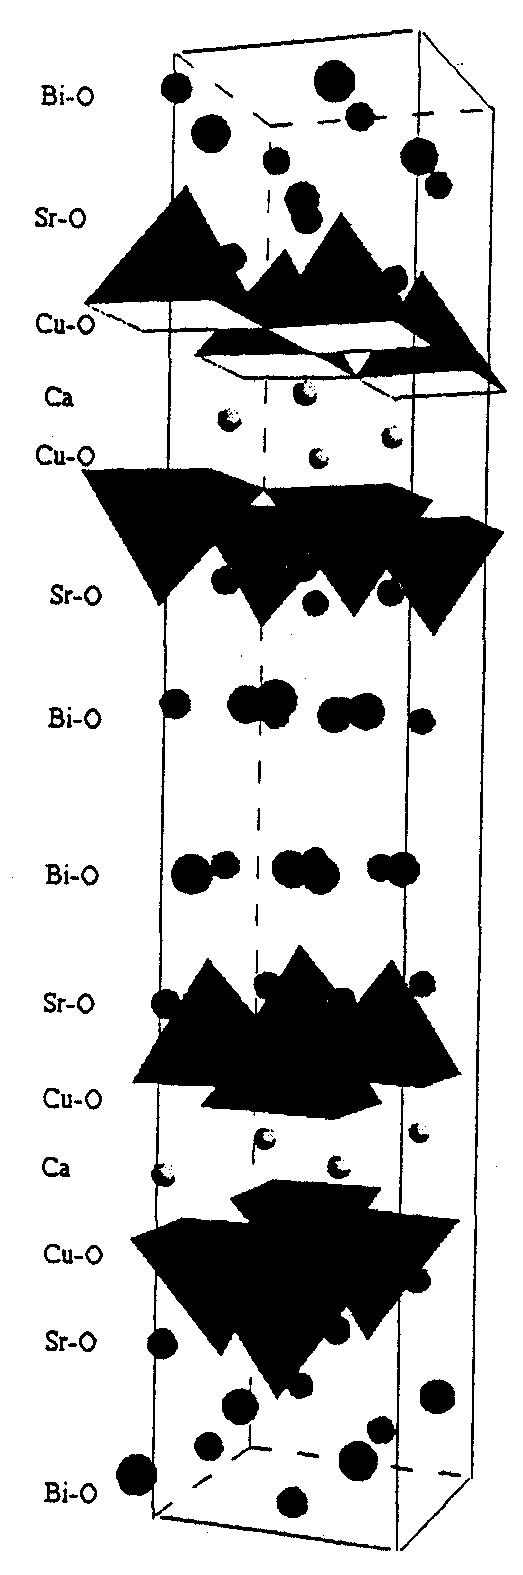 226 THE CHEMICAL CONTROL OF SUPERCONDUCTIVITY VOL. 38 FIG. 1. The idealized crystal structure of Bi 2 Sr 2 CaCu 2 O 8+ ±.